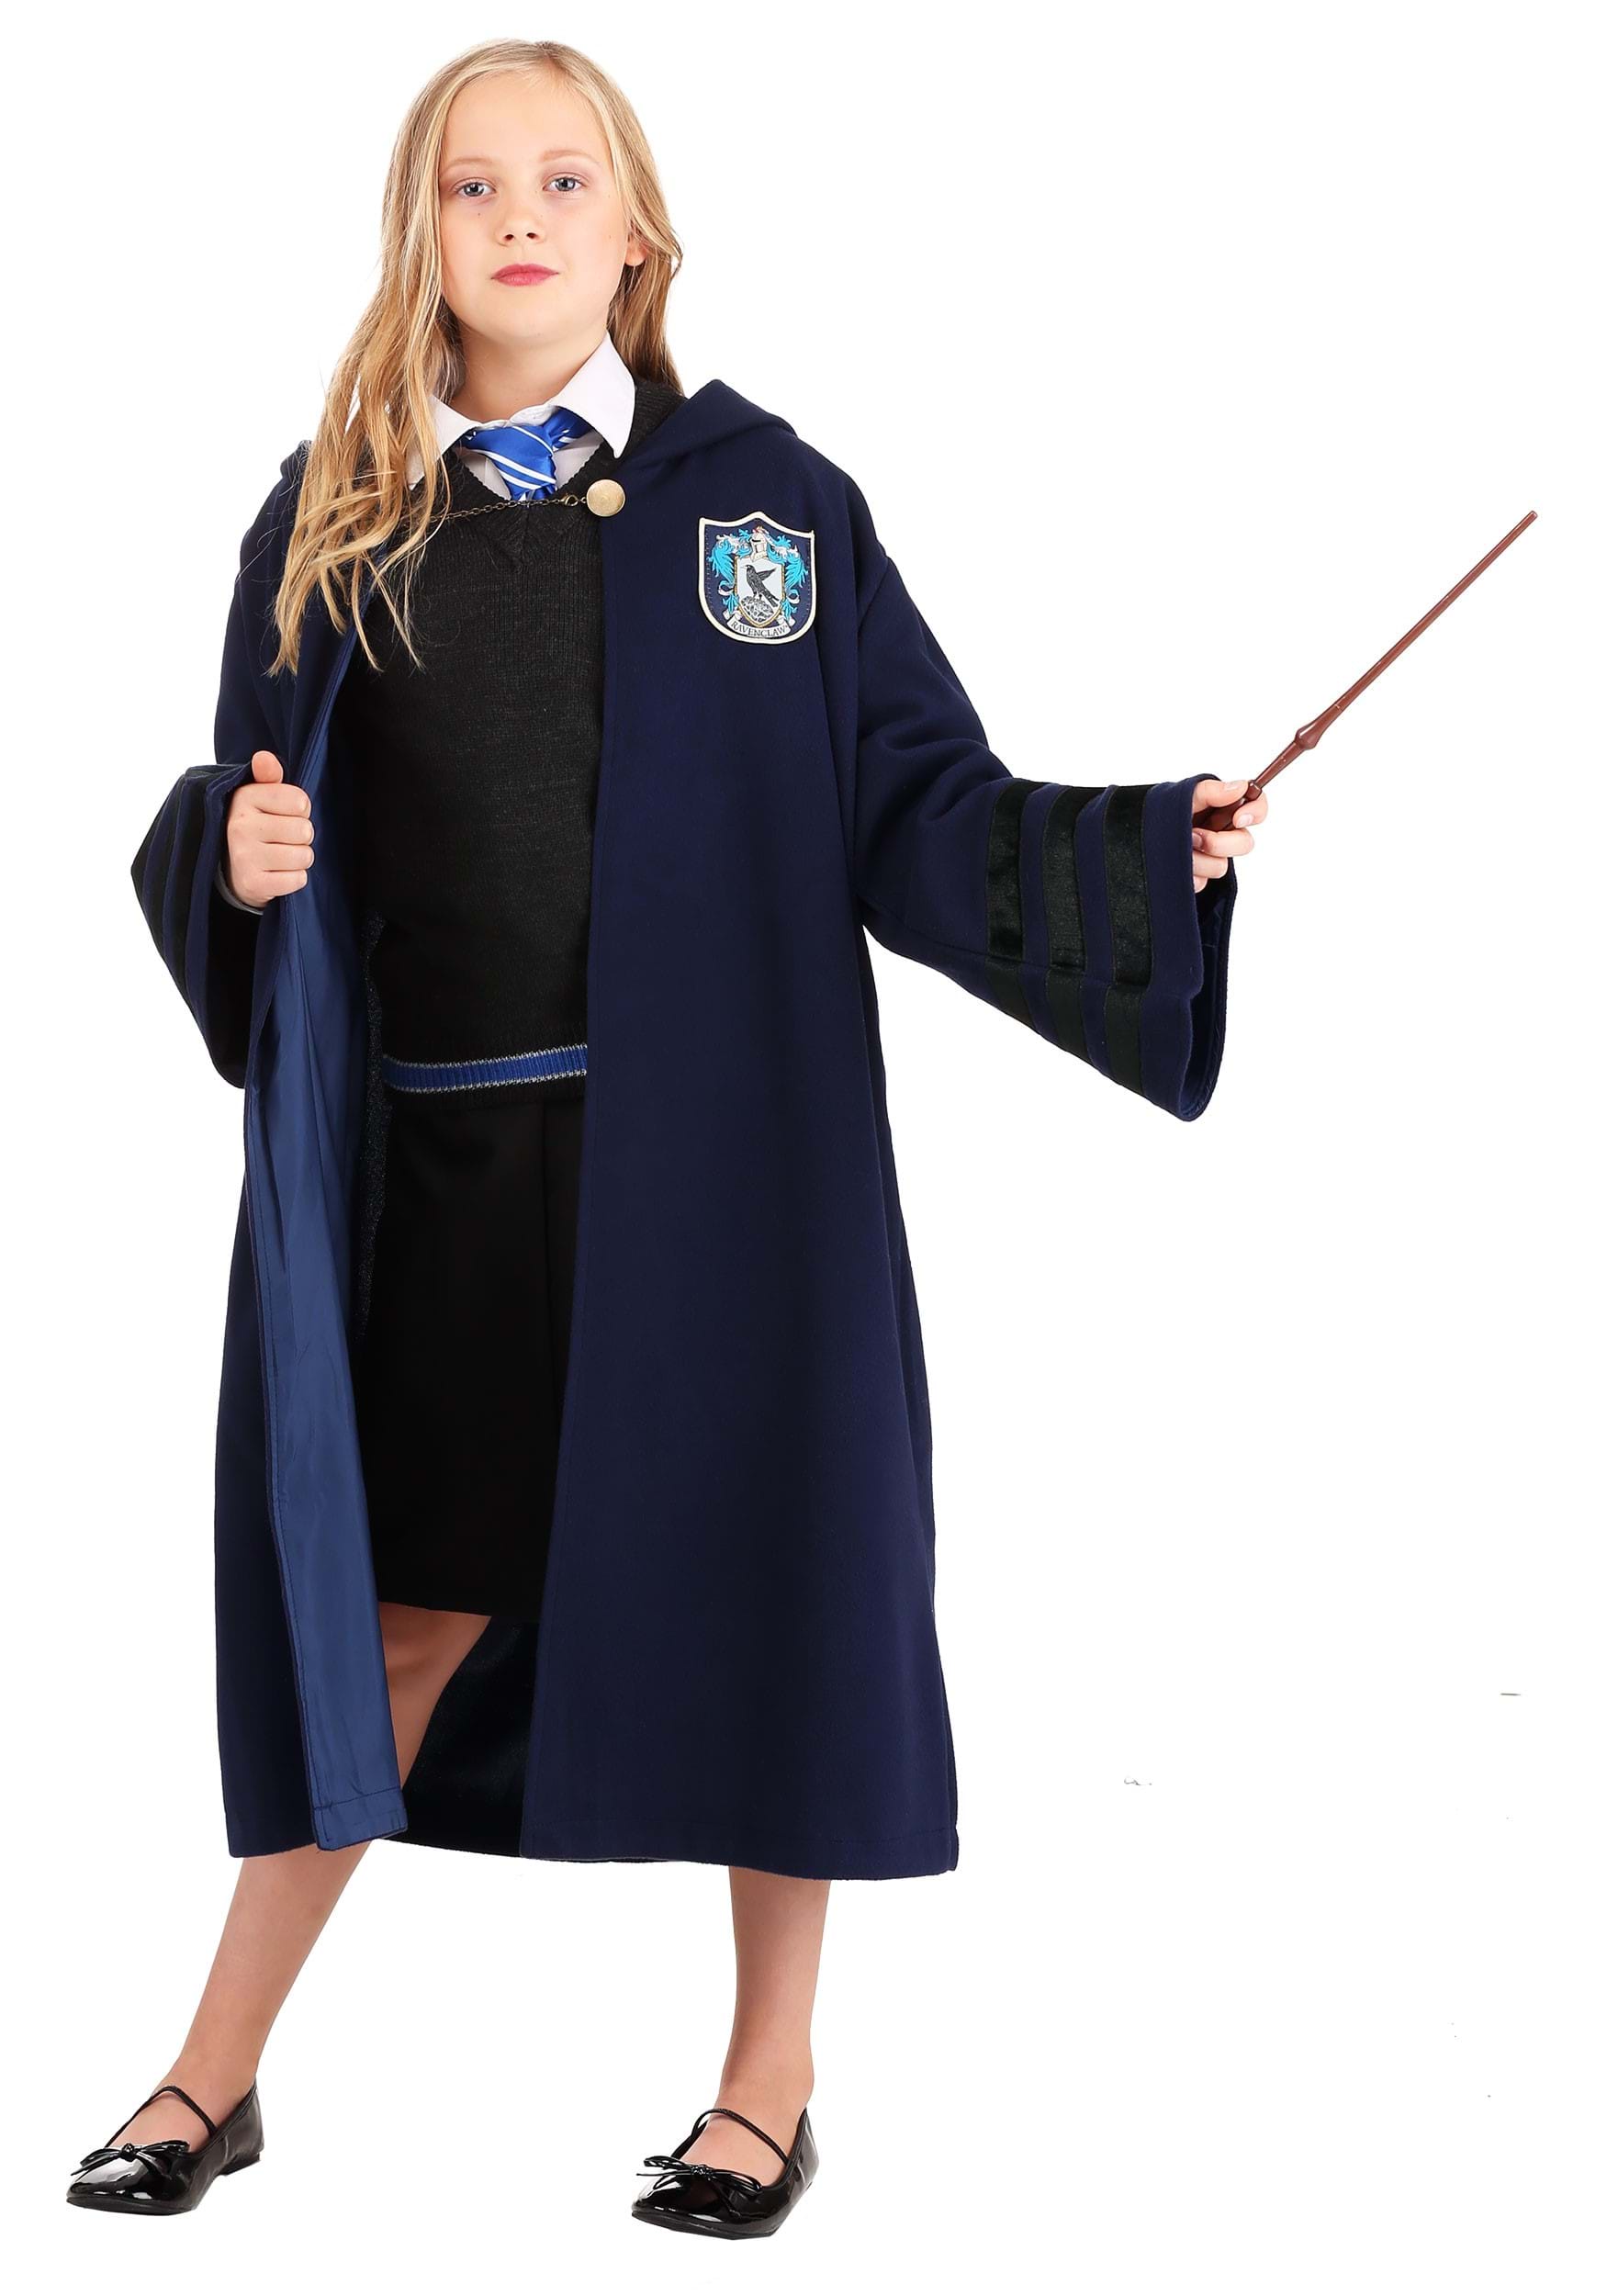 Harry Potter Deluxe Ravenclaw Robe For Kids | lupon.gov.ph